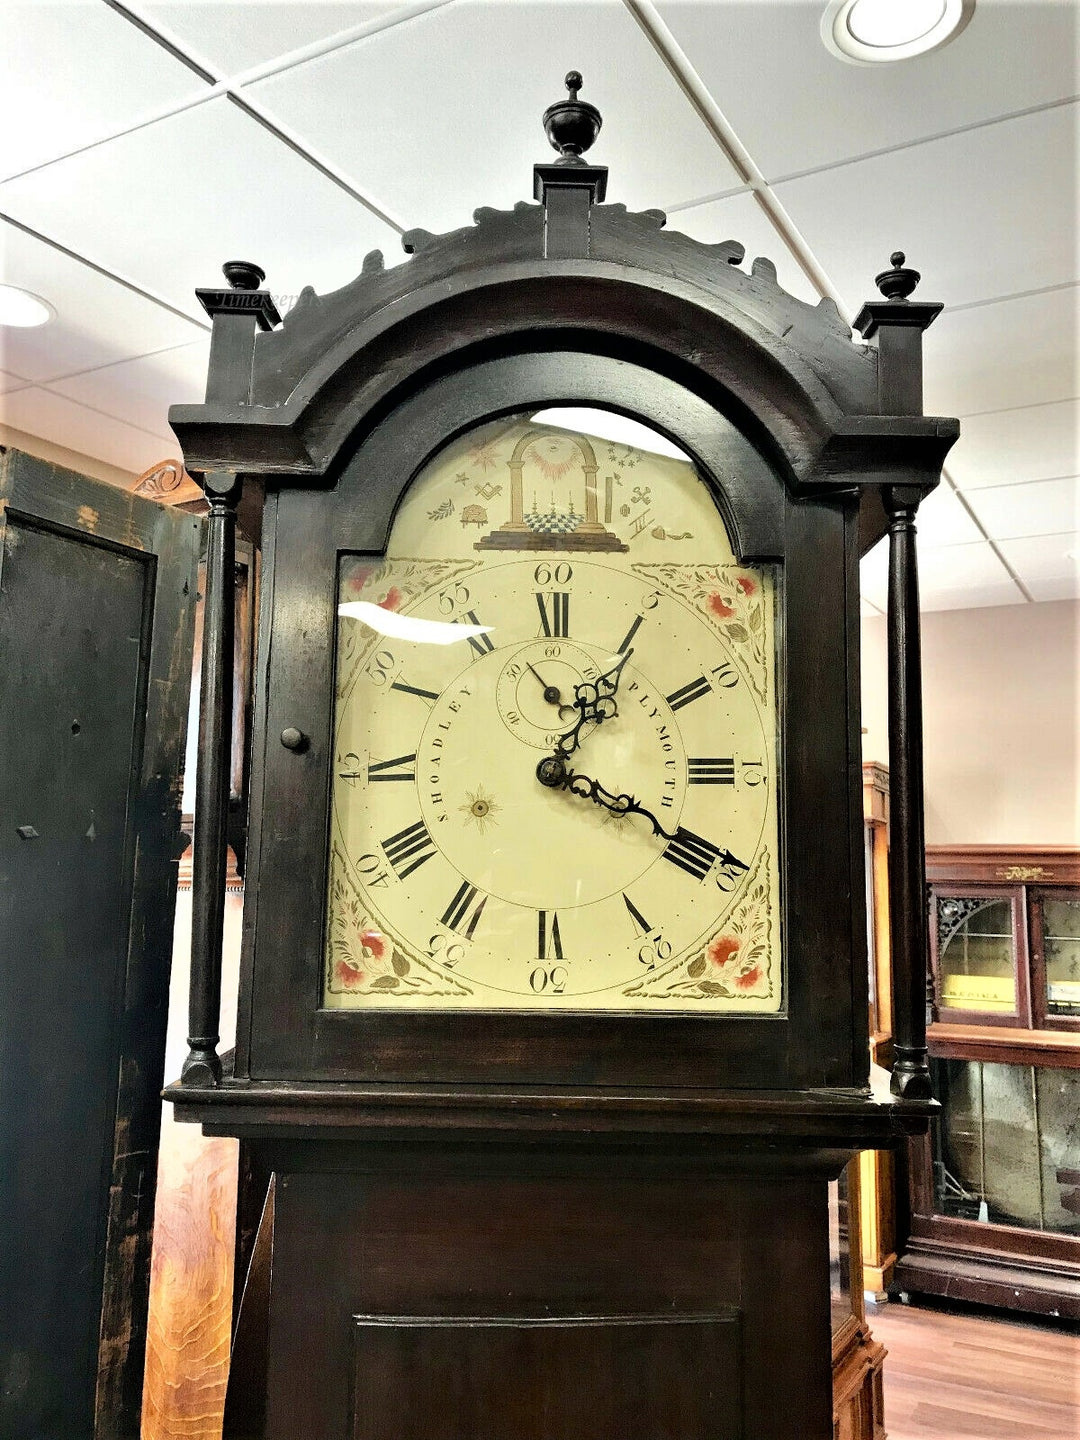 c015c Antique Working Early American Wood Works S.Hadley Tall Grandfather Clock